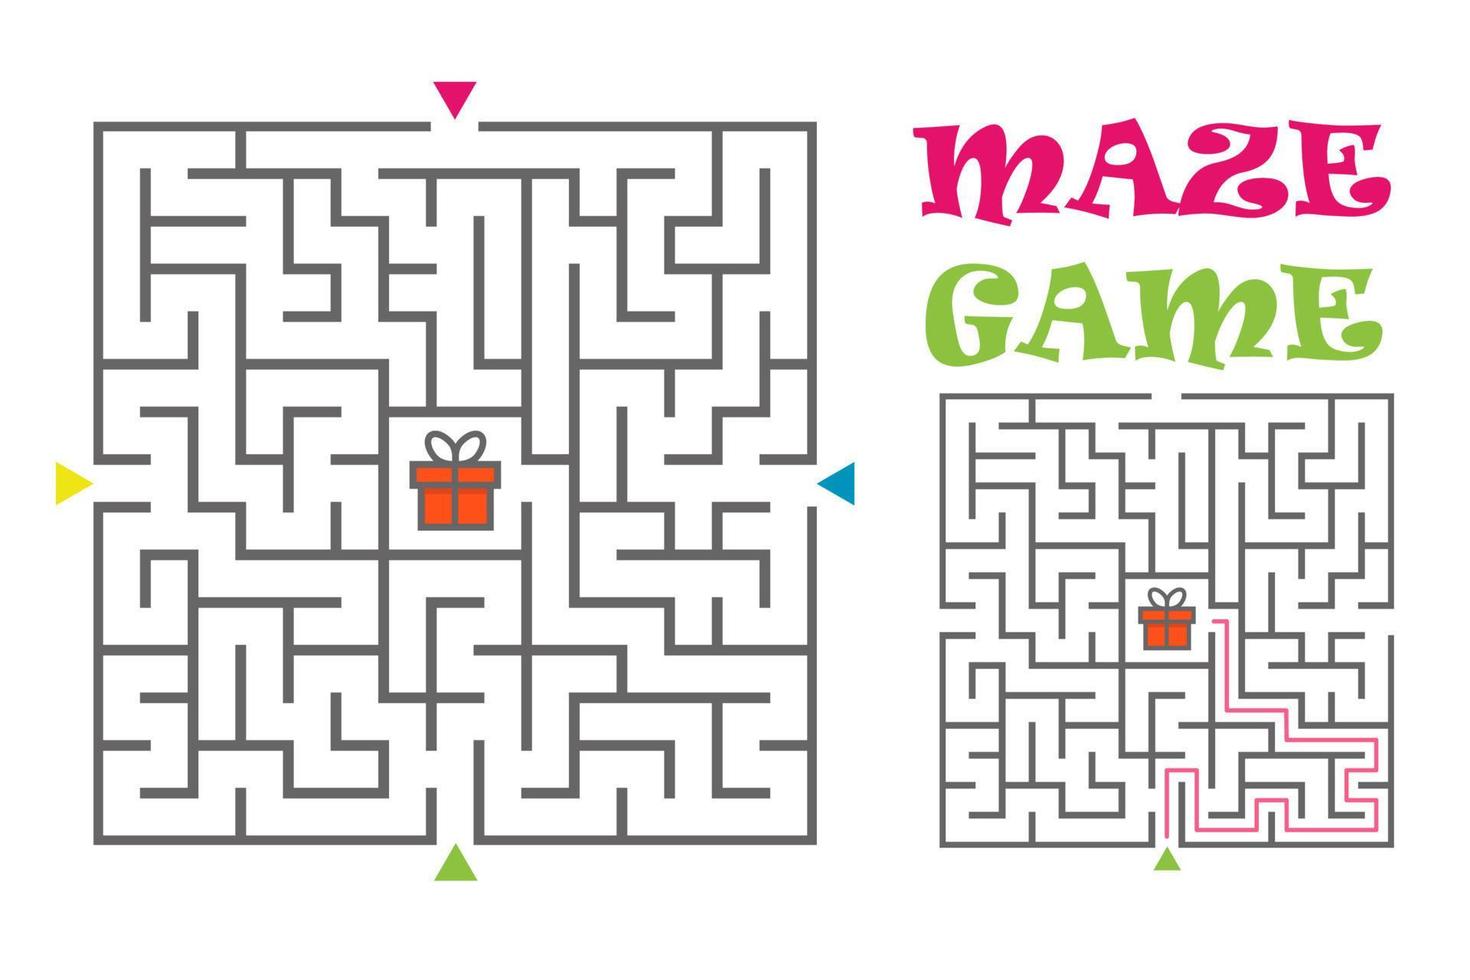 Square maze labyrinth game for kids. Logic conundrum. Four entrance and one right way to go. Vector flat illustration isolated on white background.